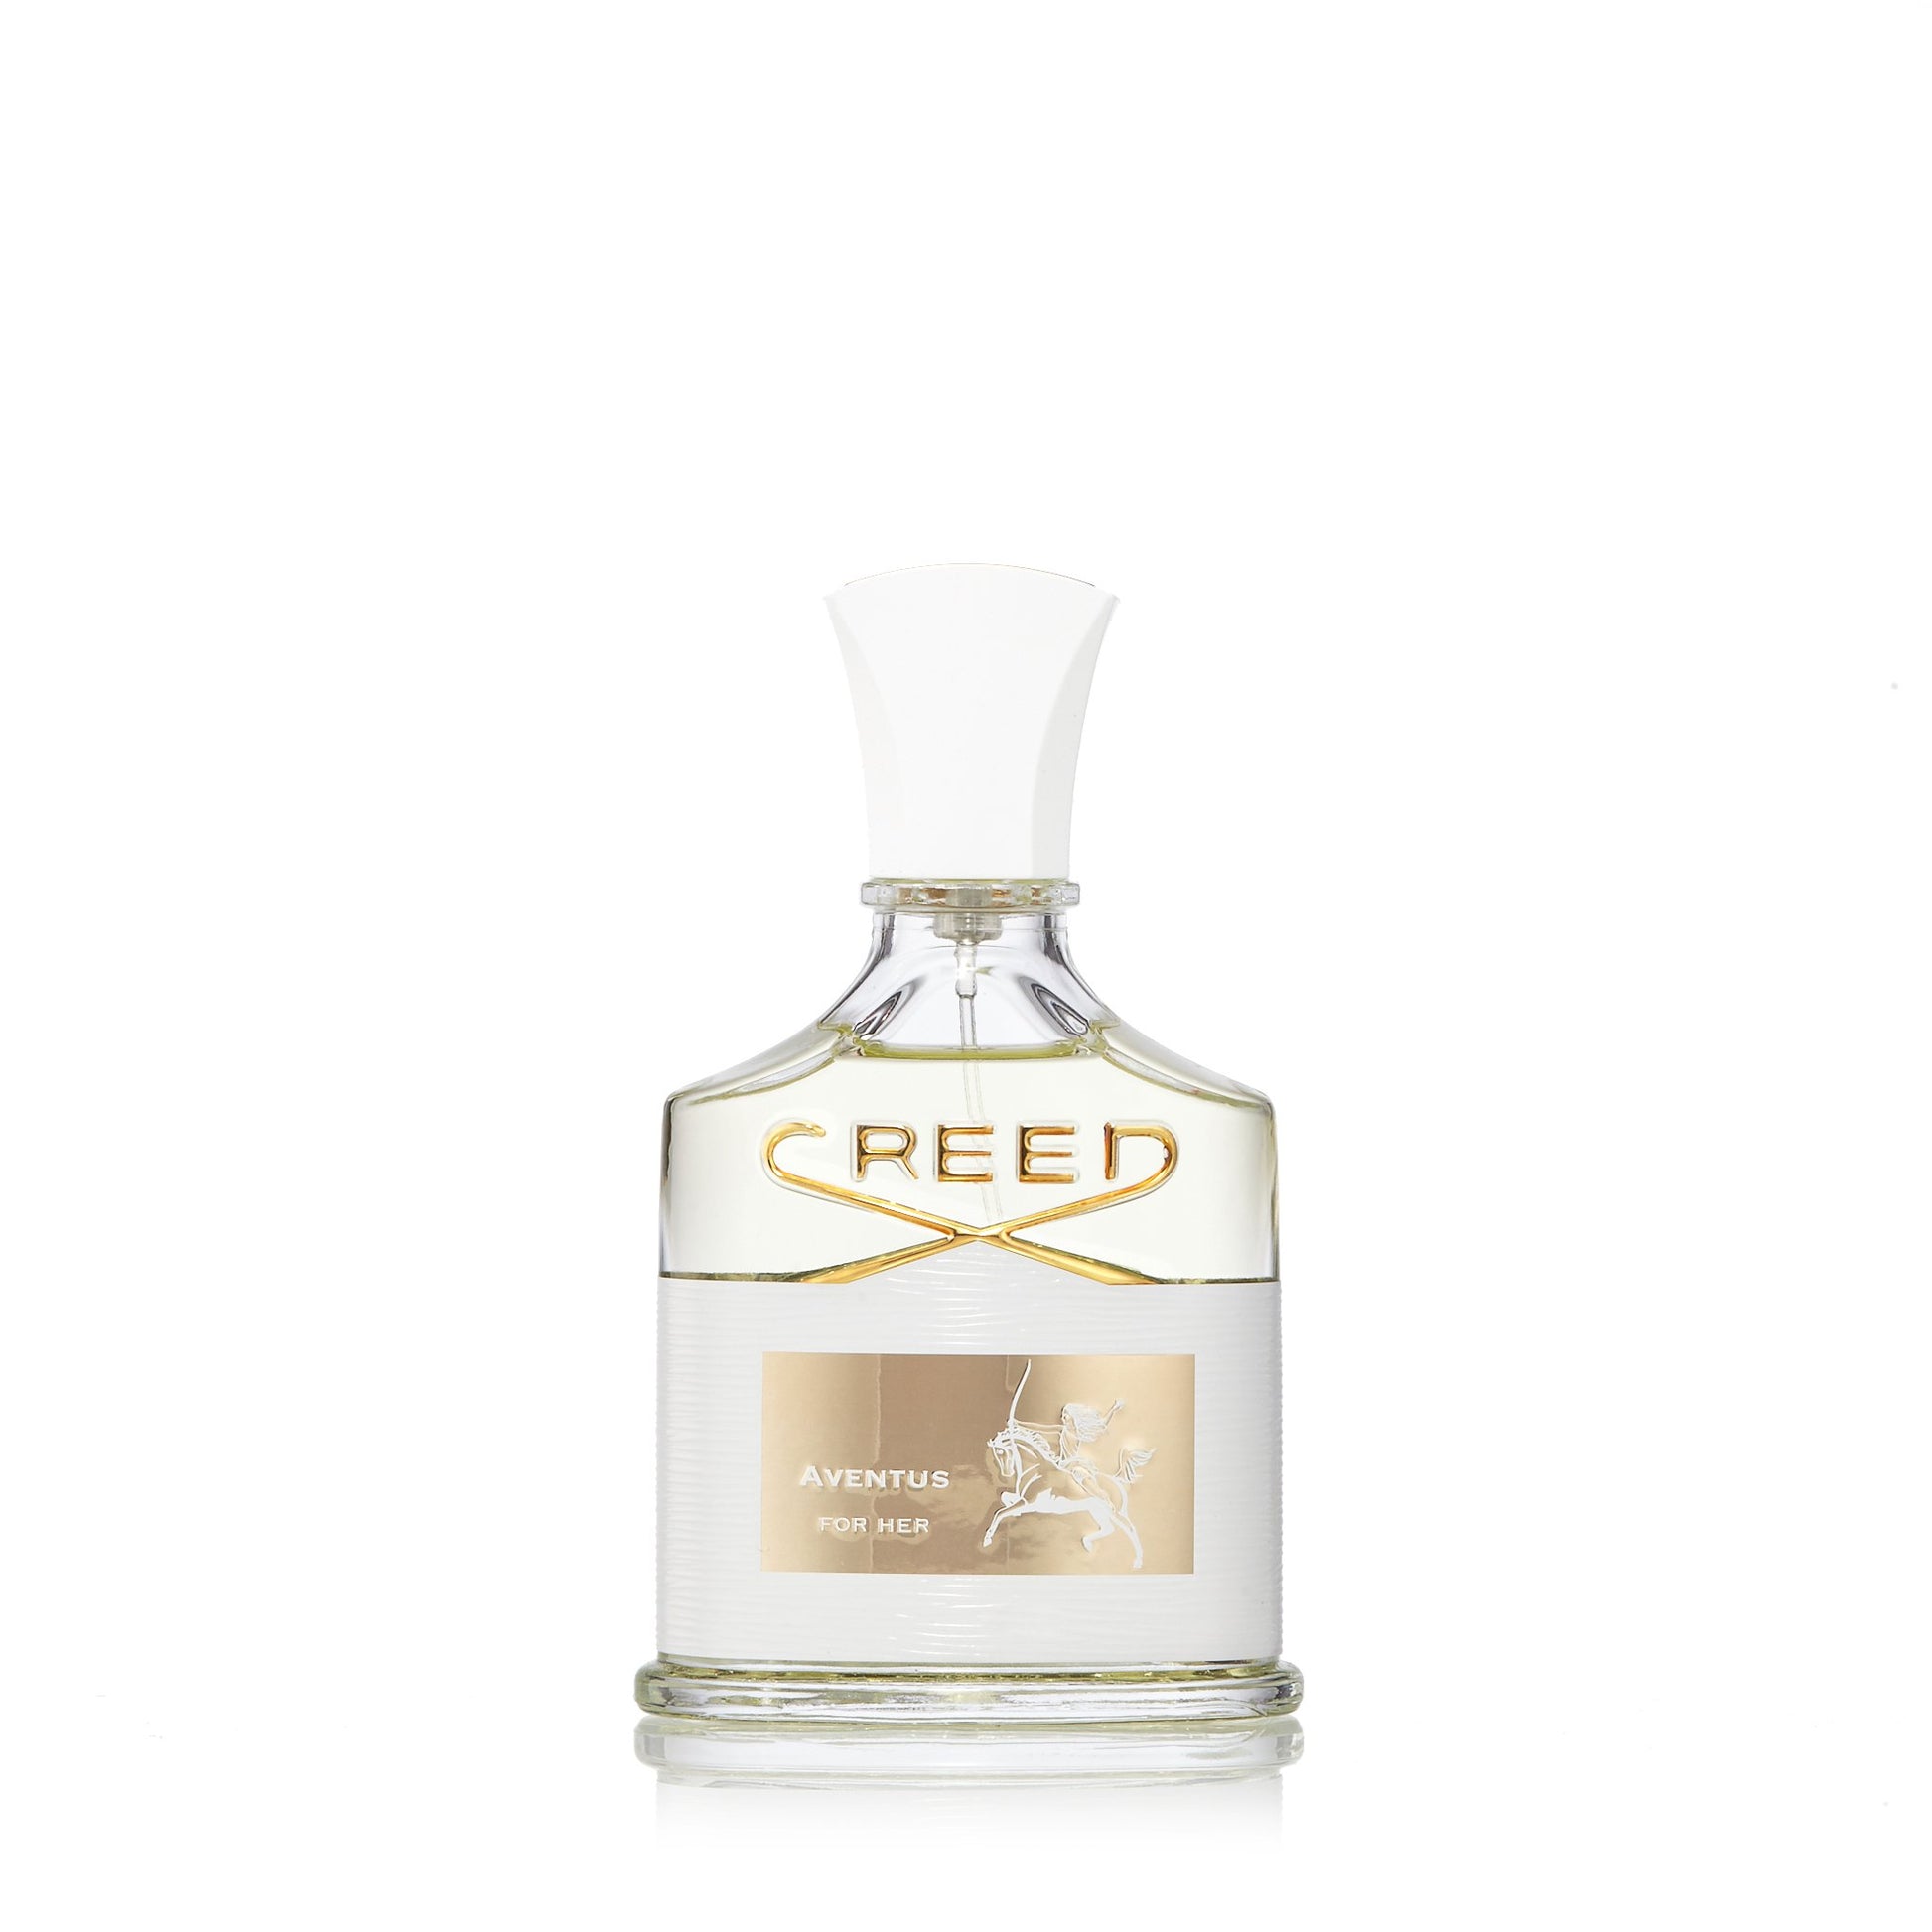 Aventus for Her Eau de Parfum Spray for Women by Creed, Product image 2